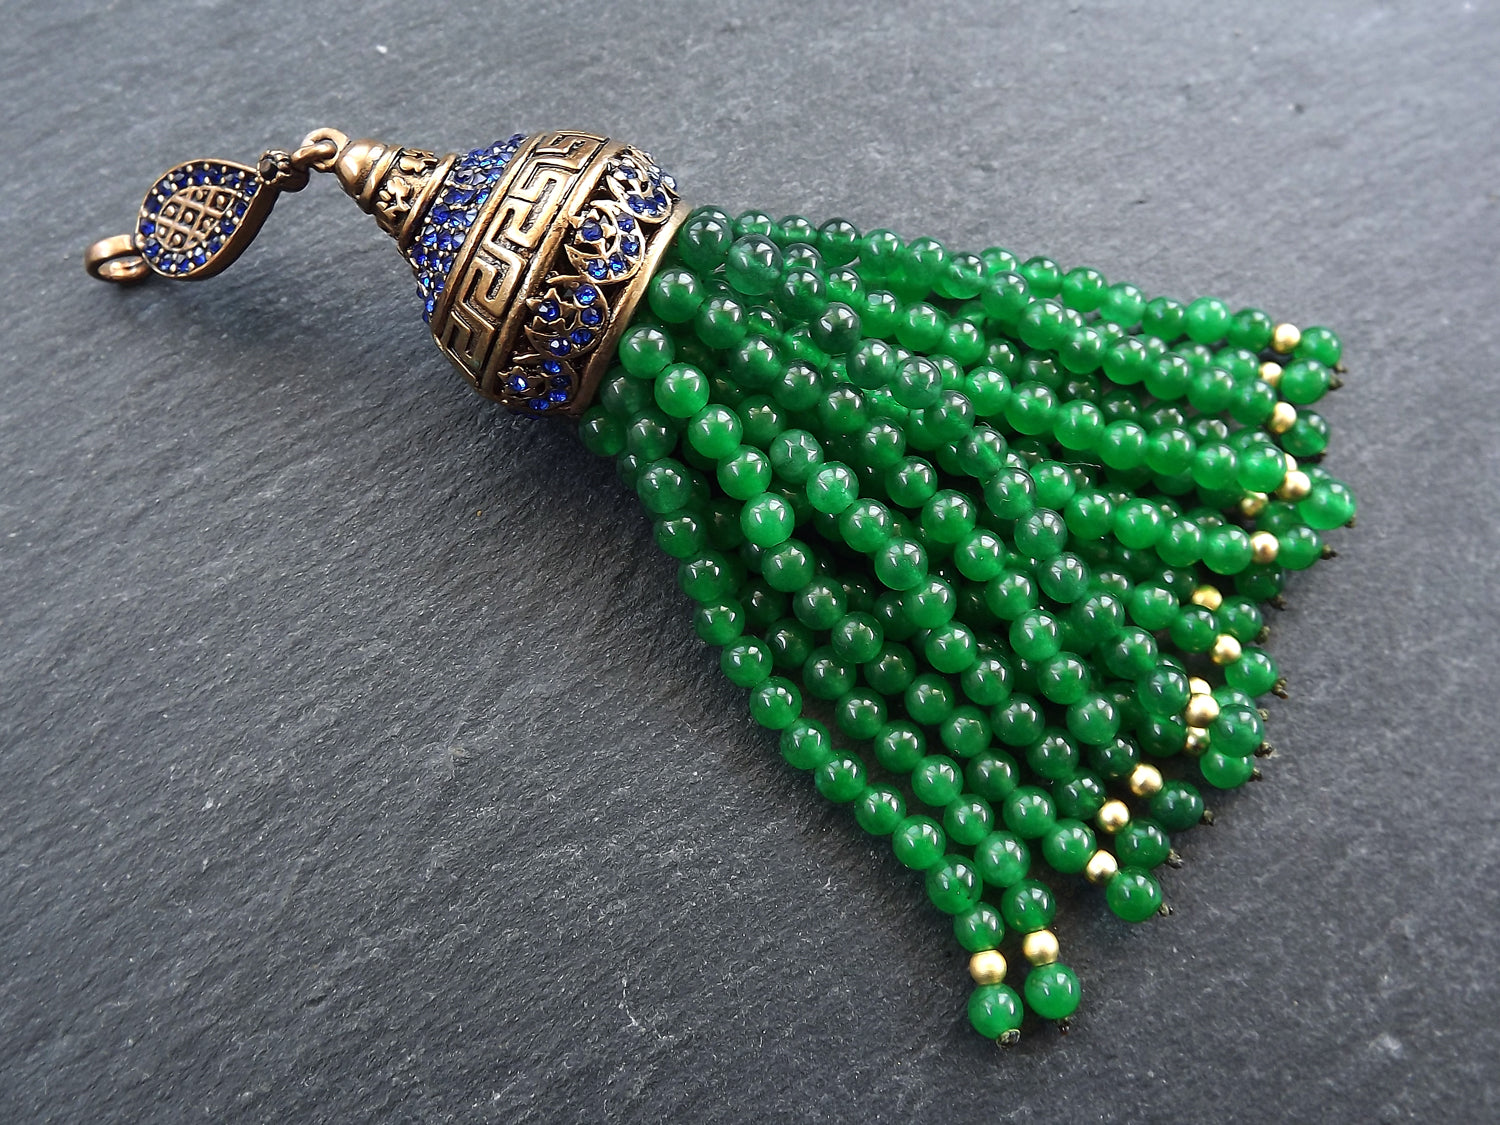 Large Long Emerald Green Jade Stone Beaded Tassel with Crystal Accents Greek Key Pattern - Antique Bronze - 1PC